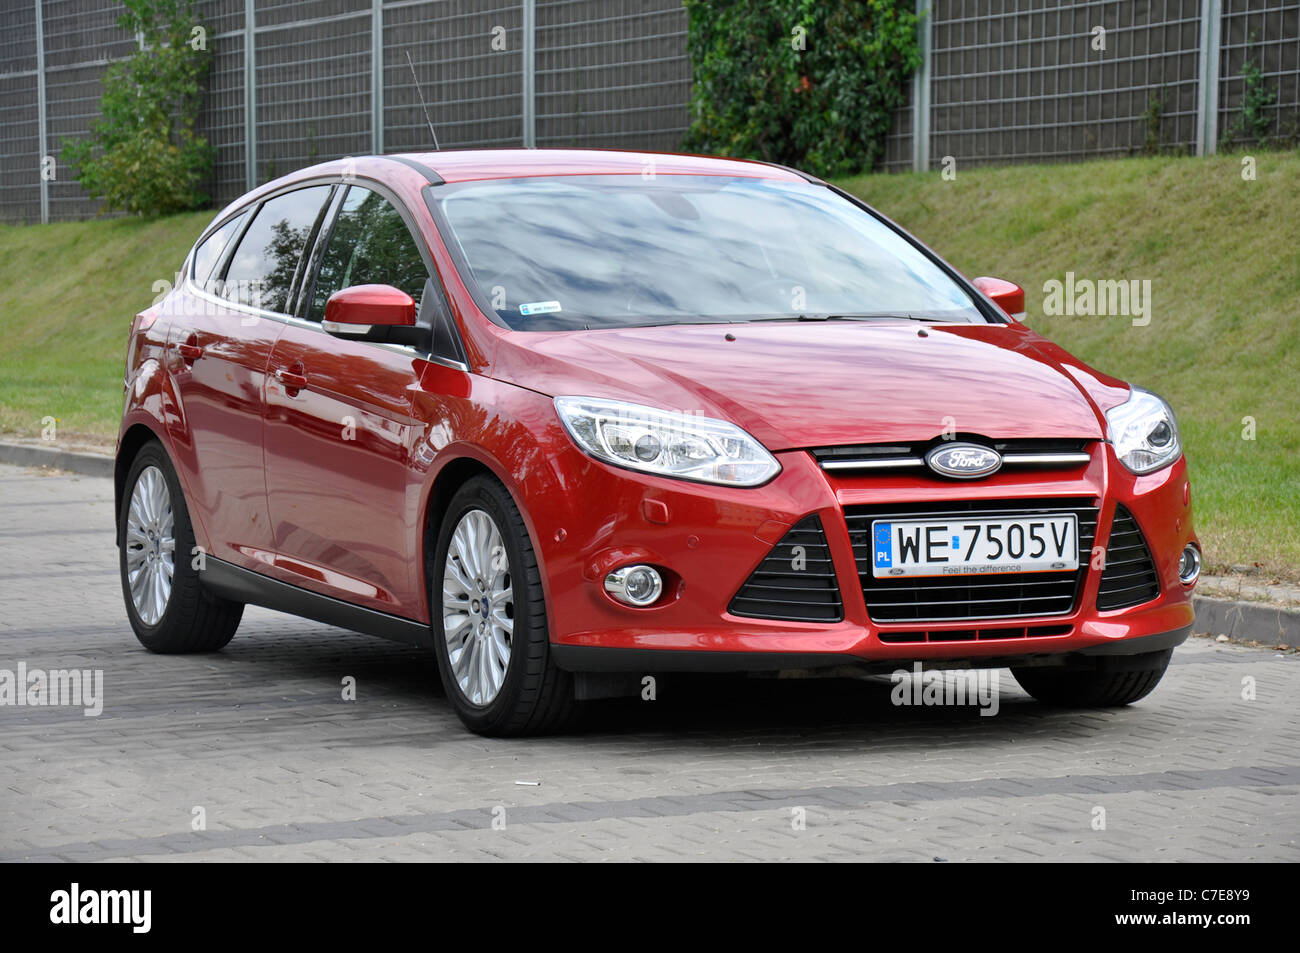 Ford Focus III 1.6 TDCi - MY 2011 - red - Popular German compact car,  segment C - on parking Stock Photo - Alamy